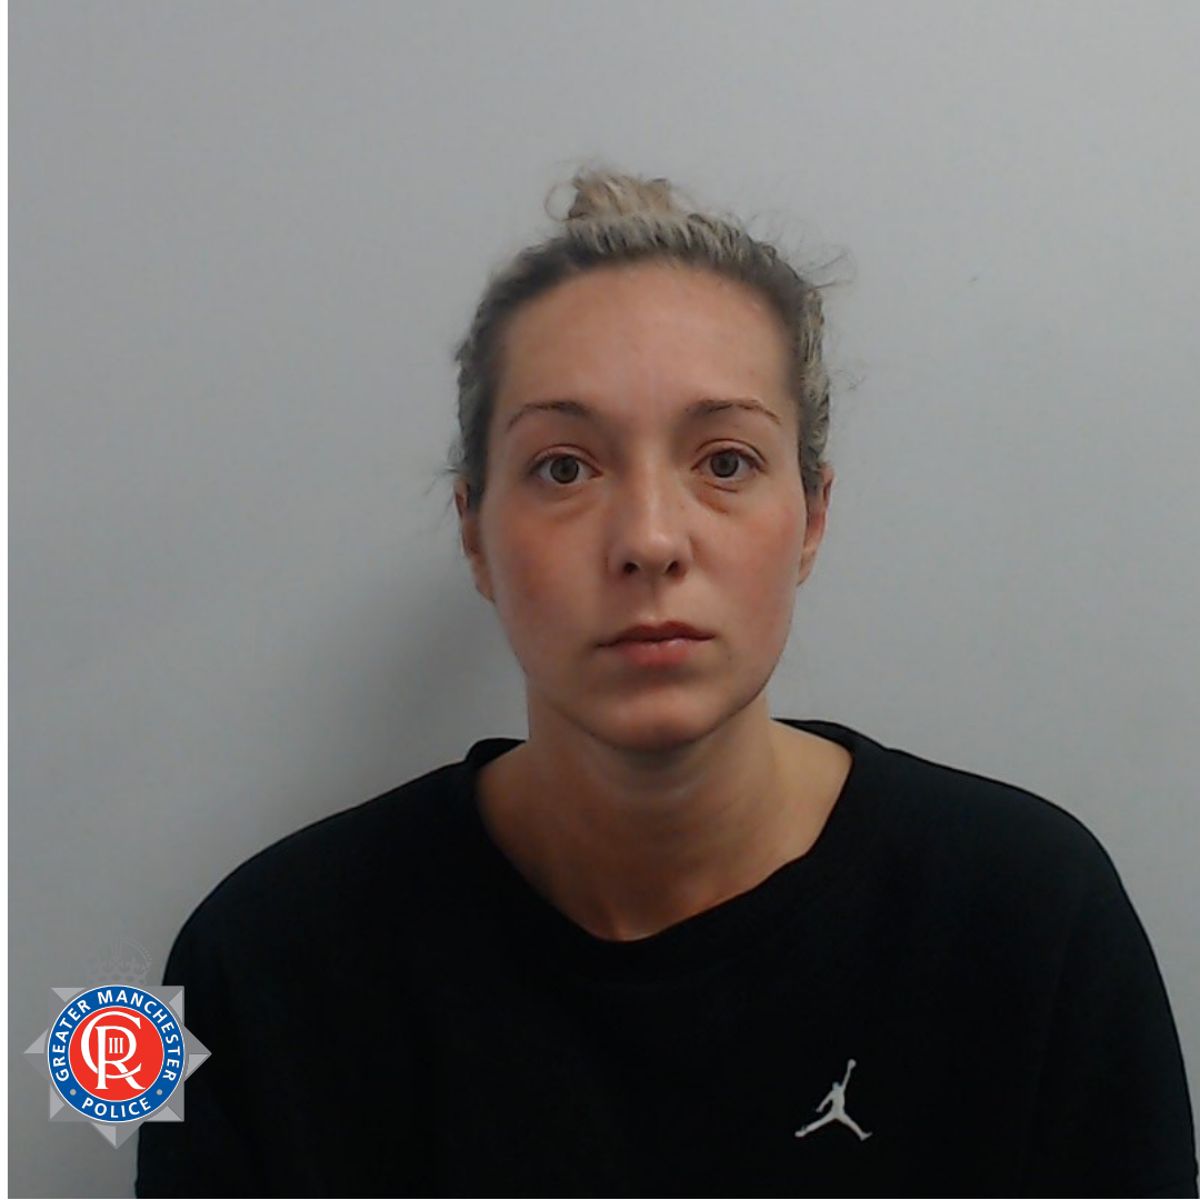 Rebecca Joynes said she had ‘caved in’ to the attention she was getting - a jury found her guilty of abusing a position of trust  (Greater Manchester Police)